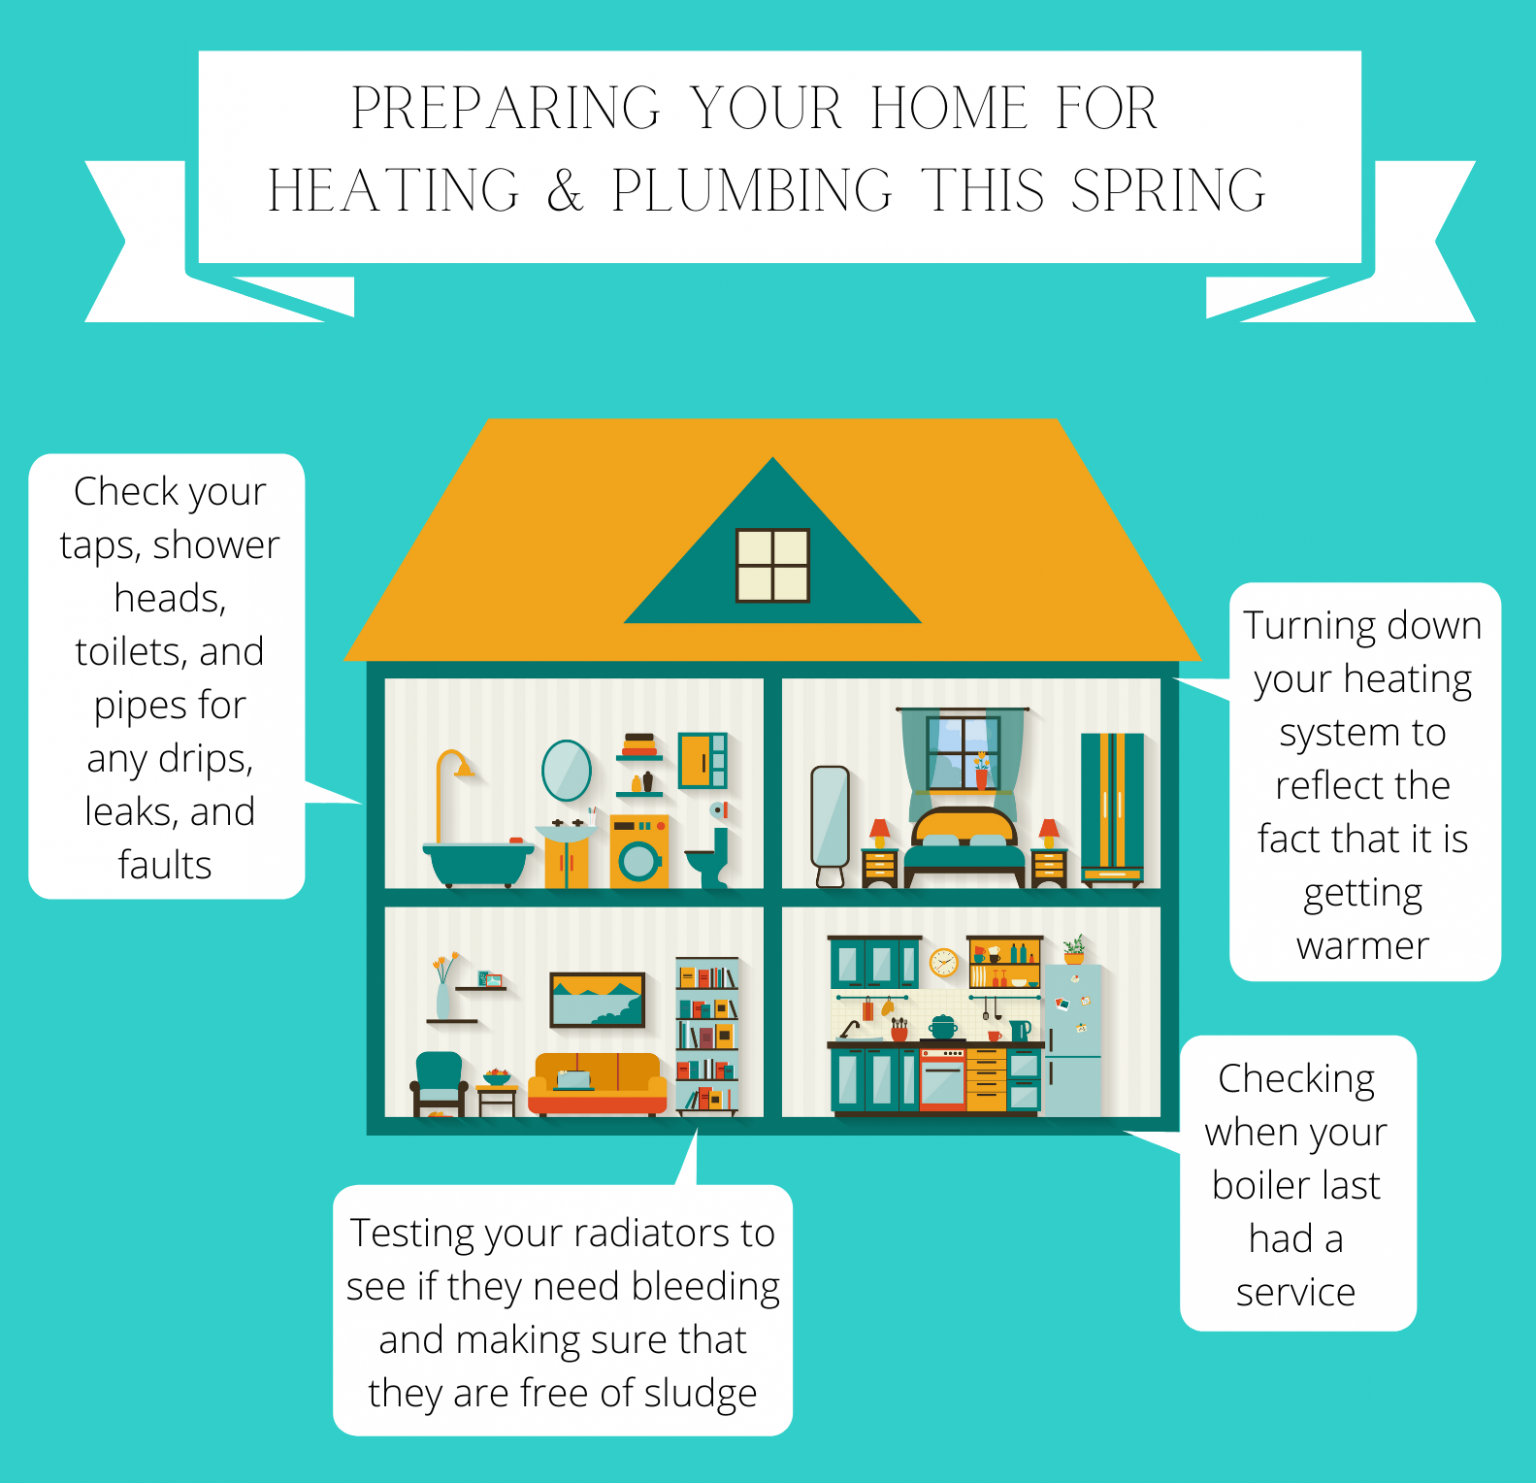 Preparing your home for heating & plumbing this spring.